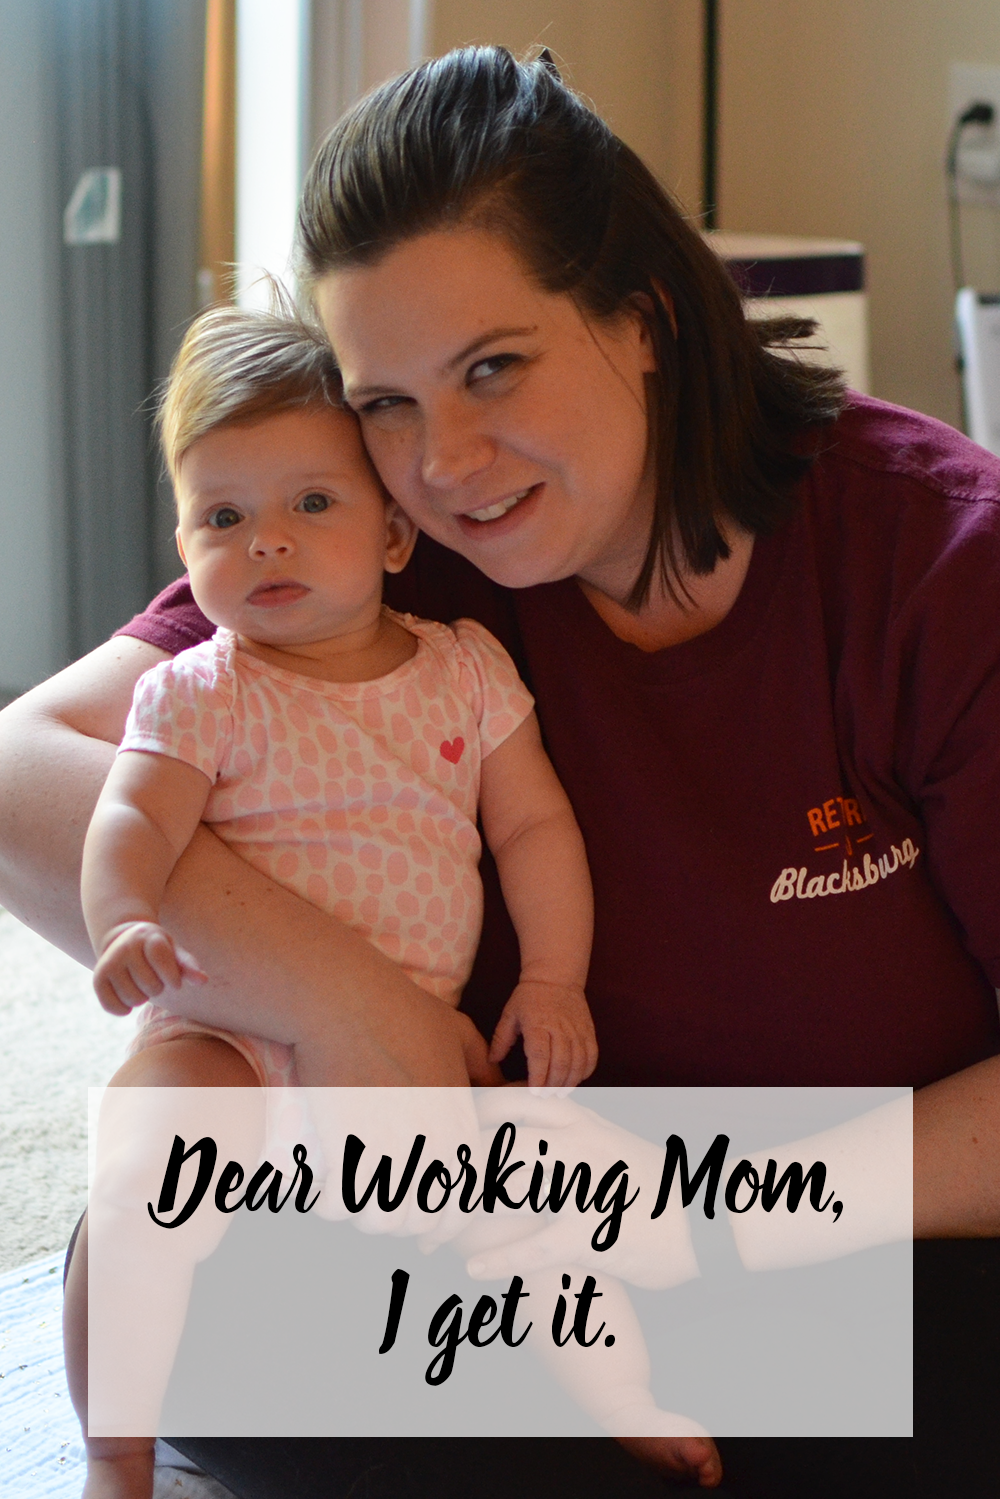 Working motherhood is not for the faint of heart and comes with it's own challenges. To the working moms out there - I get it.